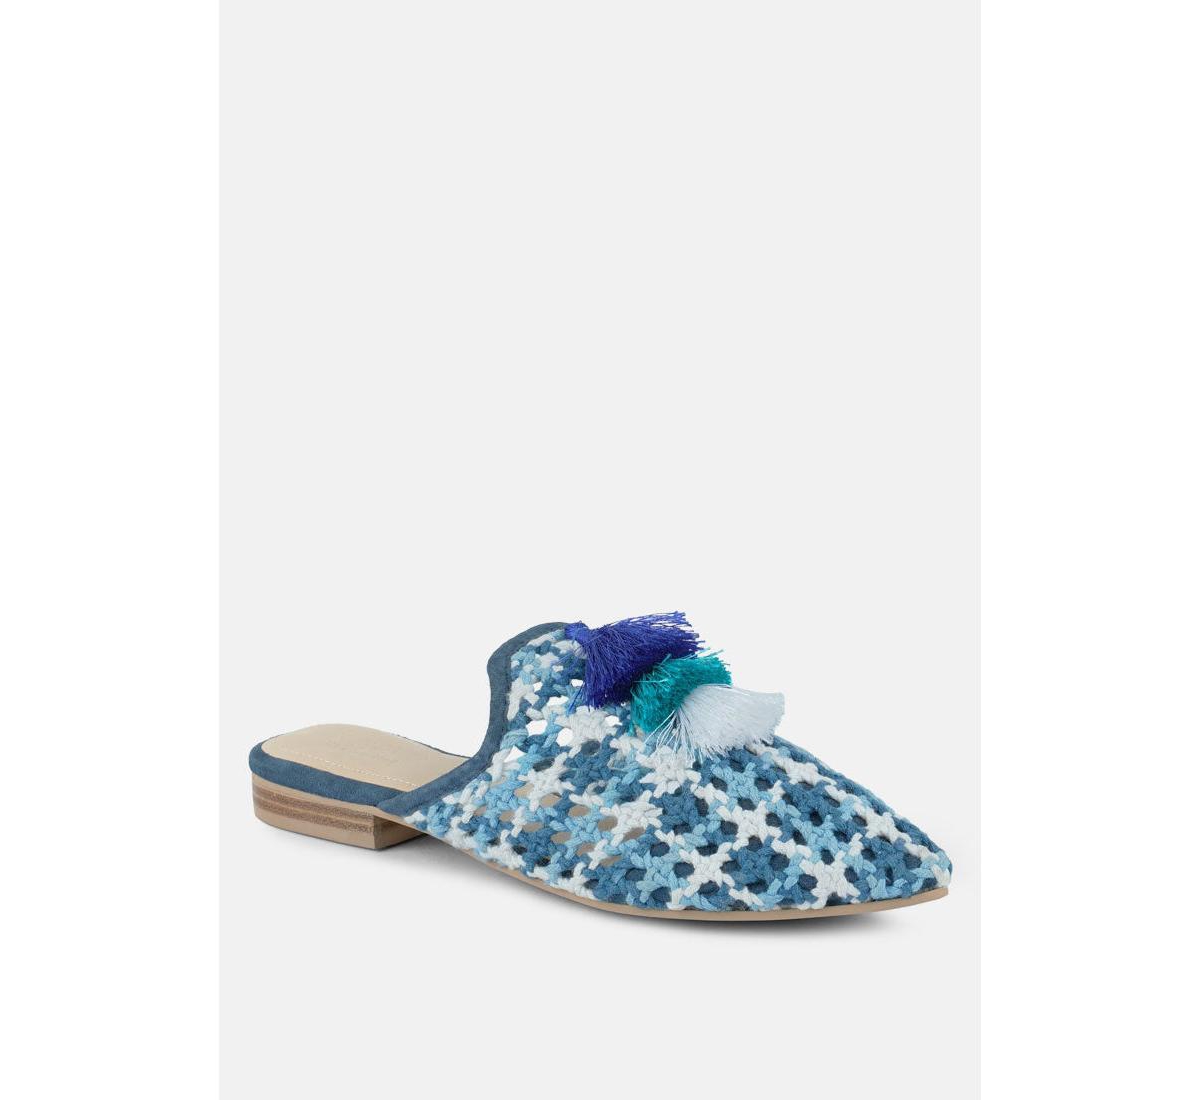 RAG & CO MARIANA WOMEN'S WOVEN FLAT MULES WITH TASSELS